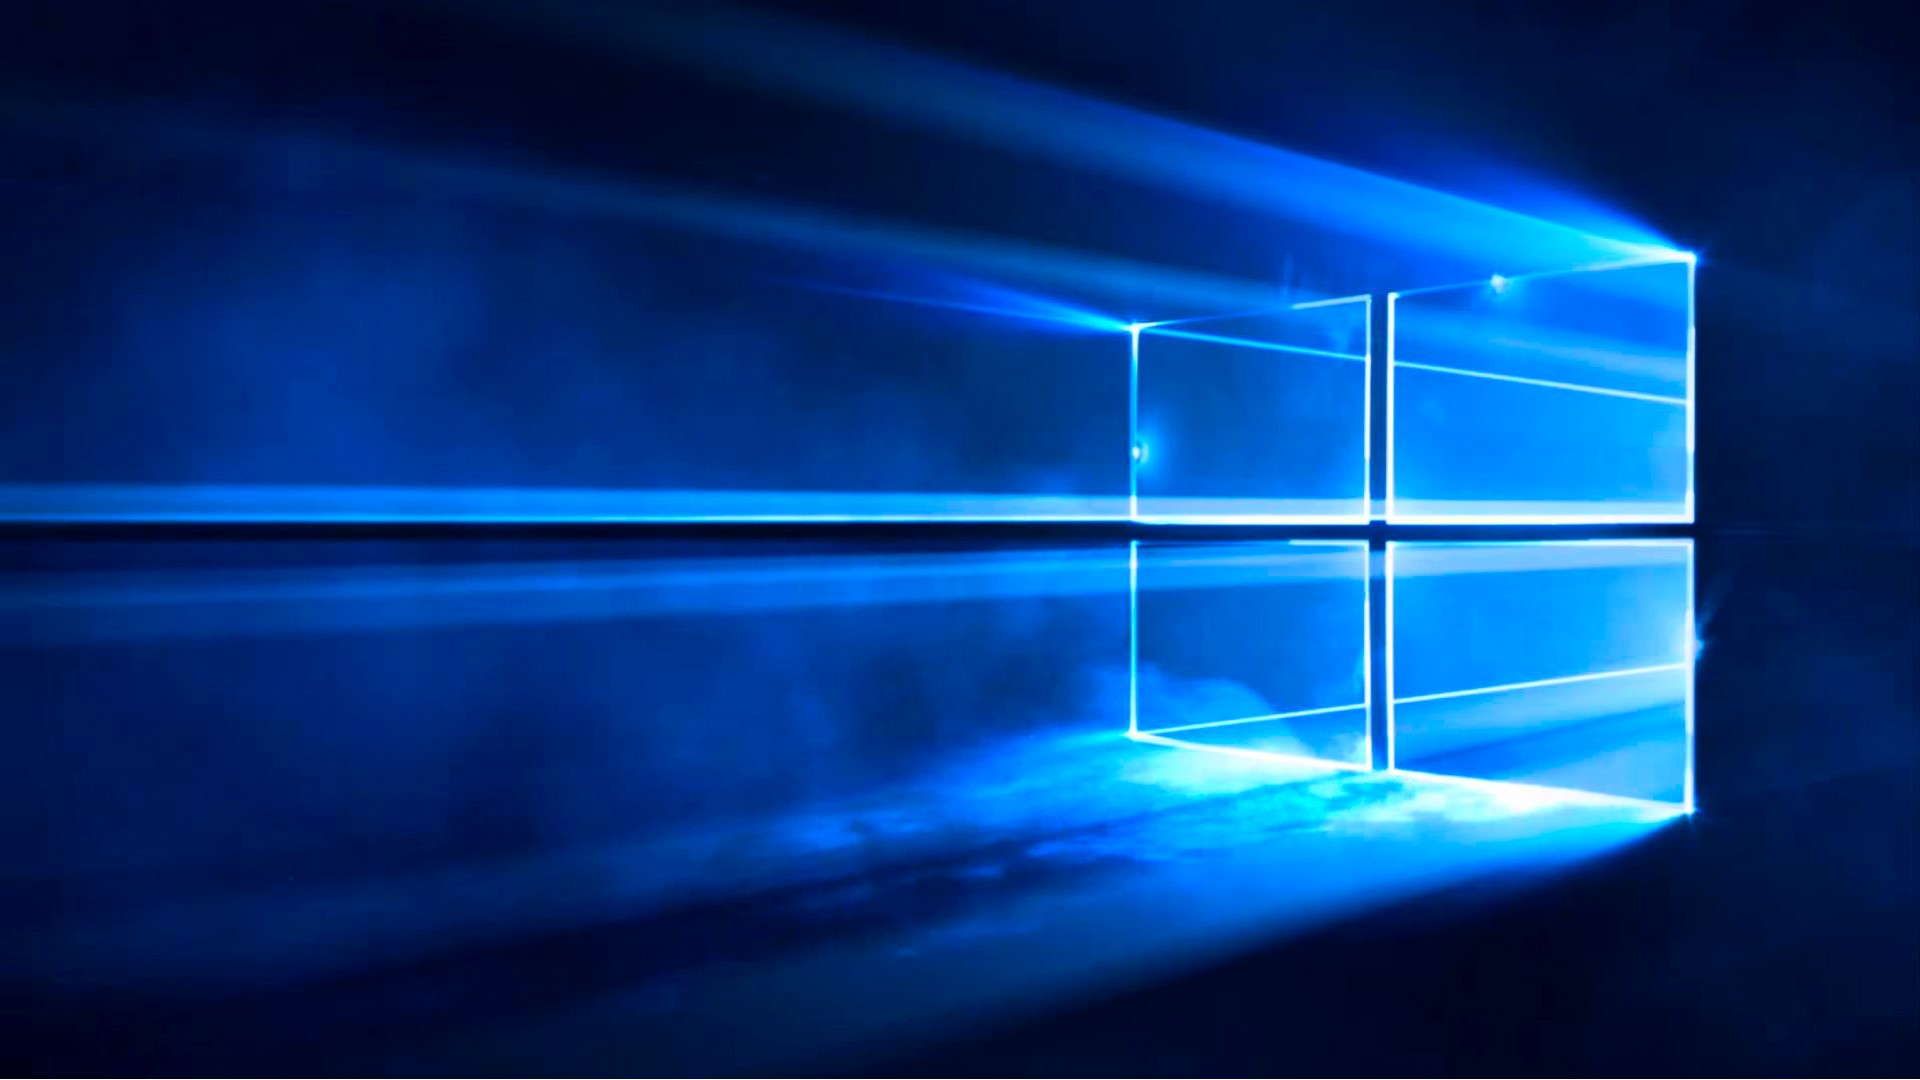 Windows 10 Redstone Will Bring Improvements For Background Processes